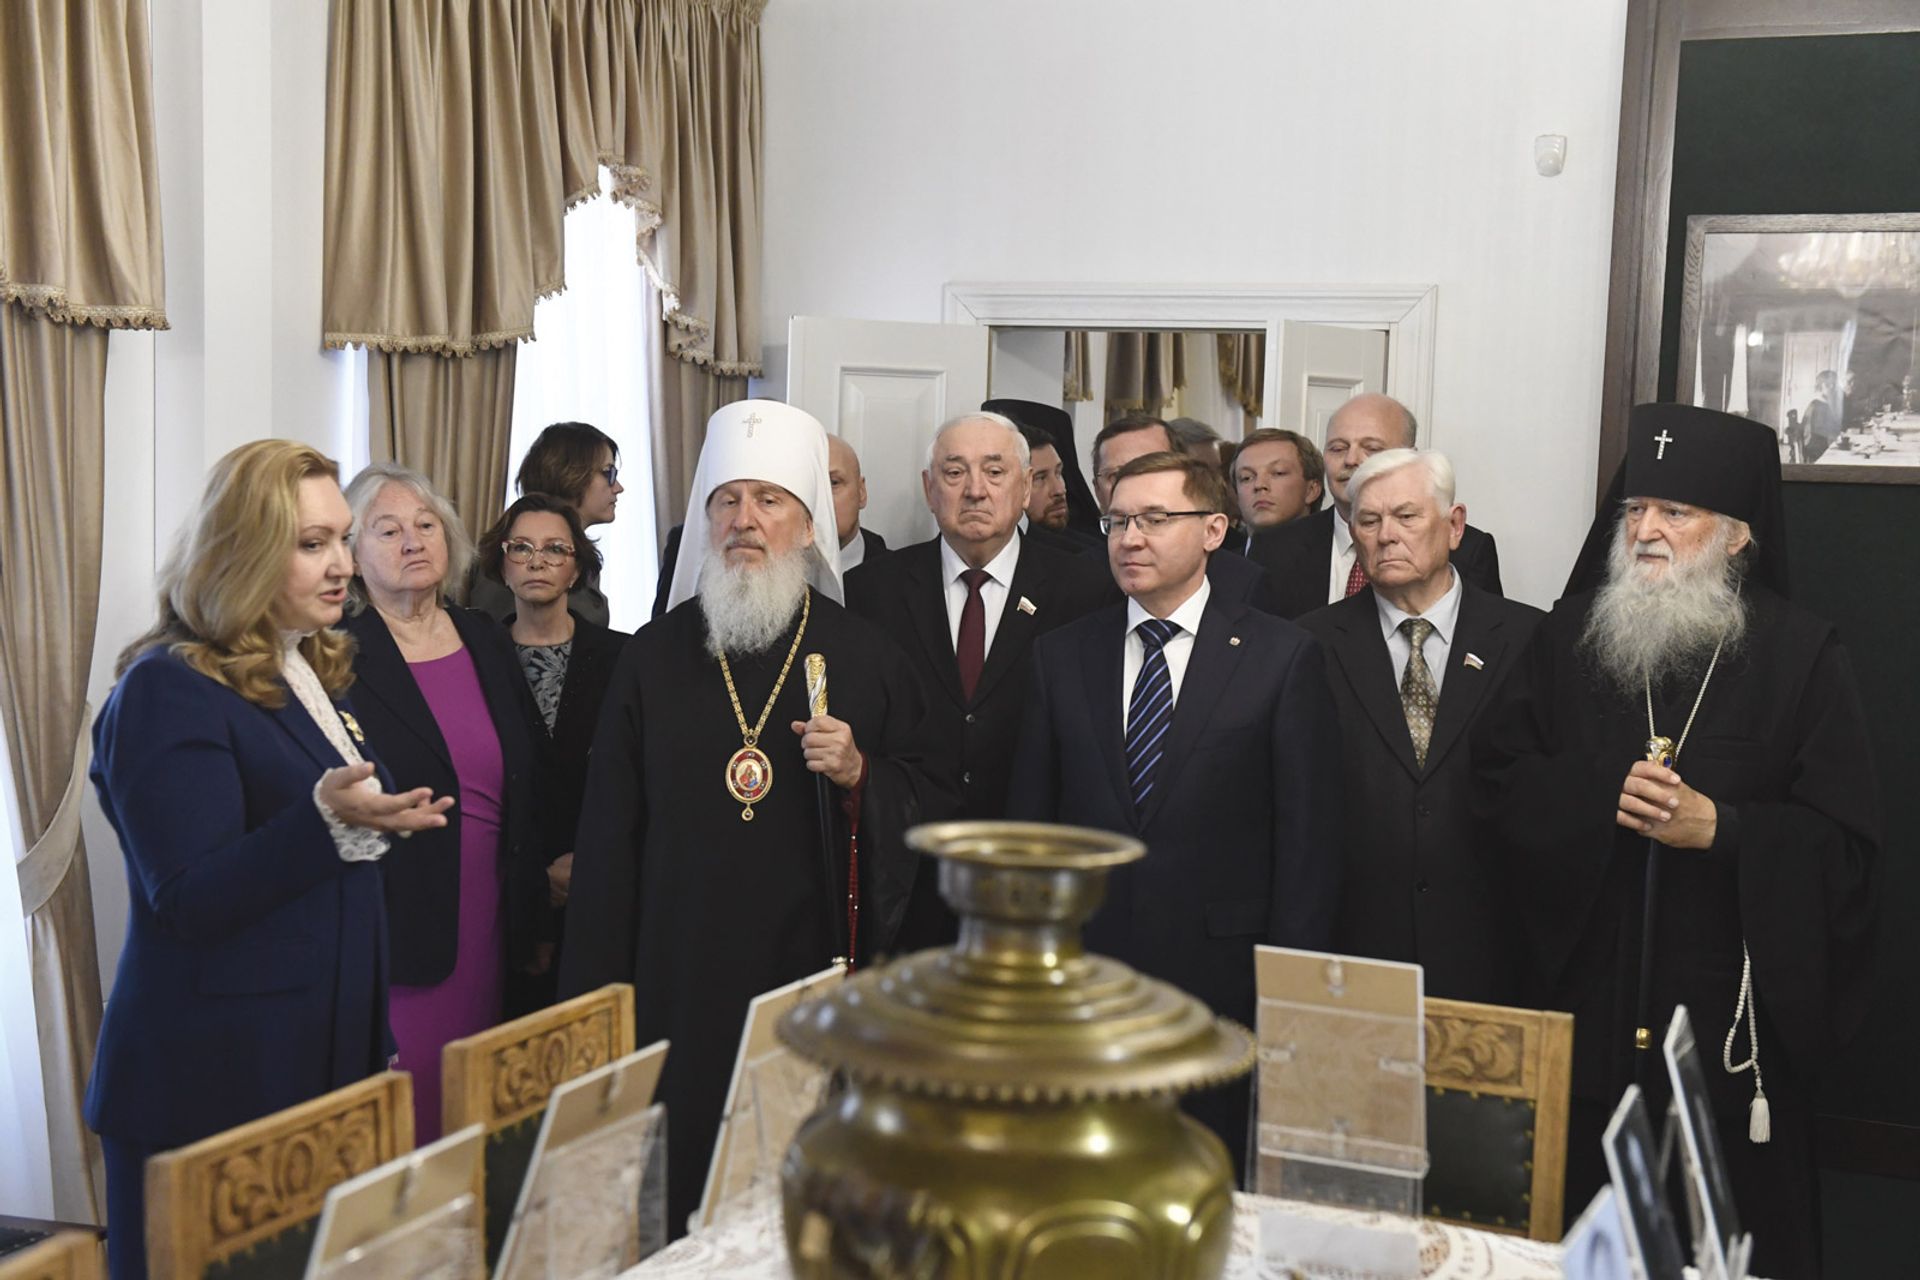 The historian Anna Gromova (far left), who oversaw the curatorial side of the new museum and Paul Kulikovsky (back row, far right), a great-great grandson of Tsar Alexander III, with dignitaries from the Russian Orthodox Church at the opening Sergey Rusanov